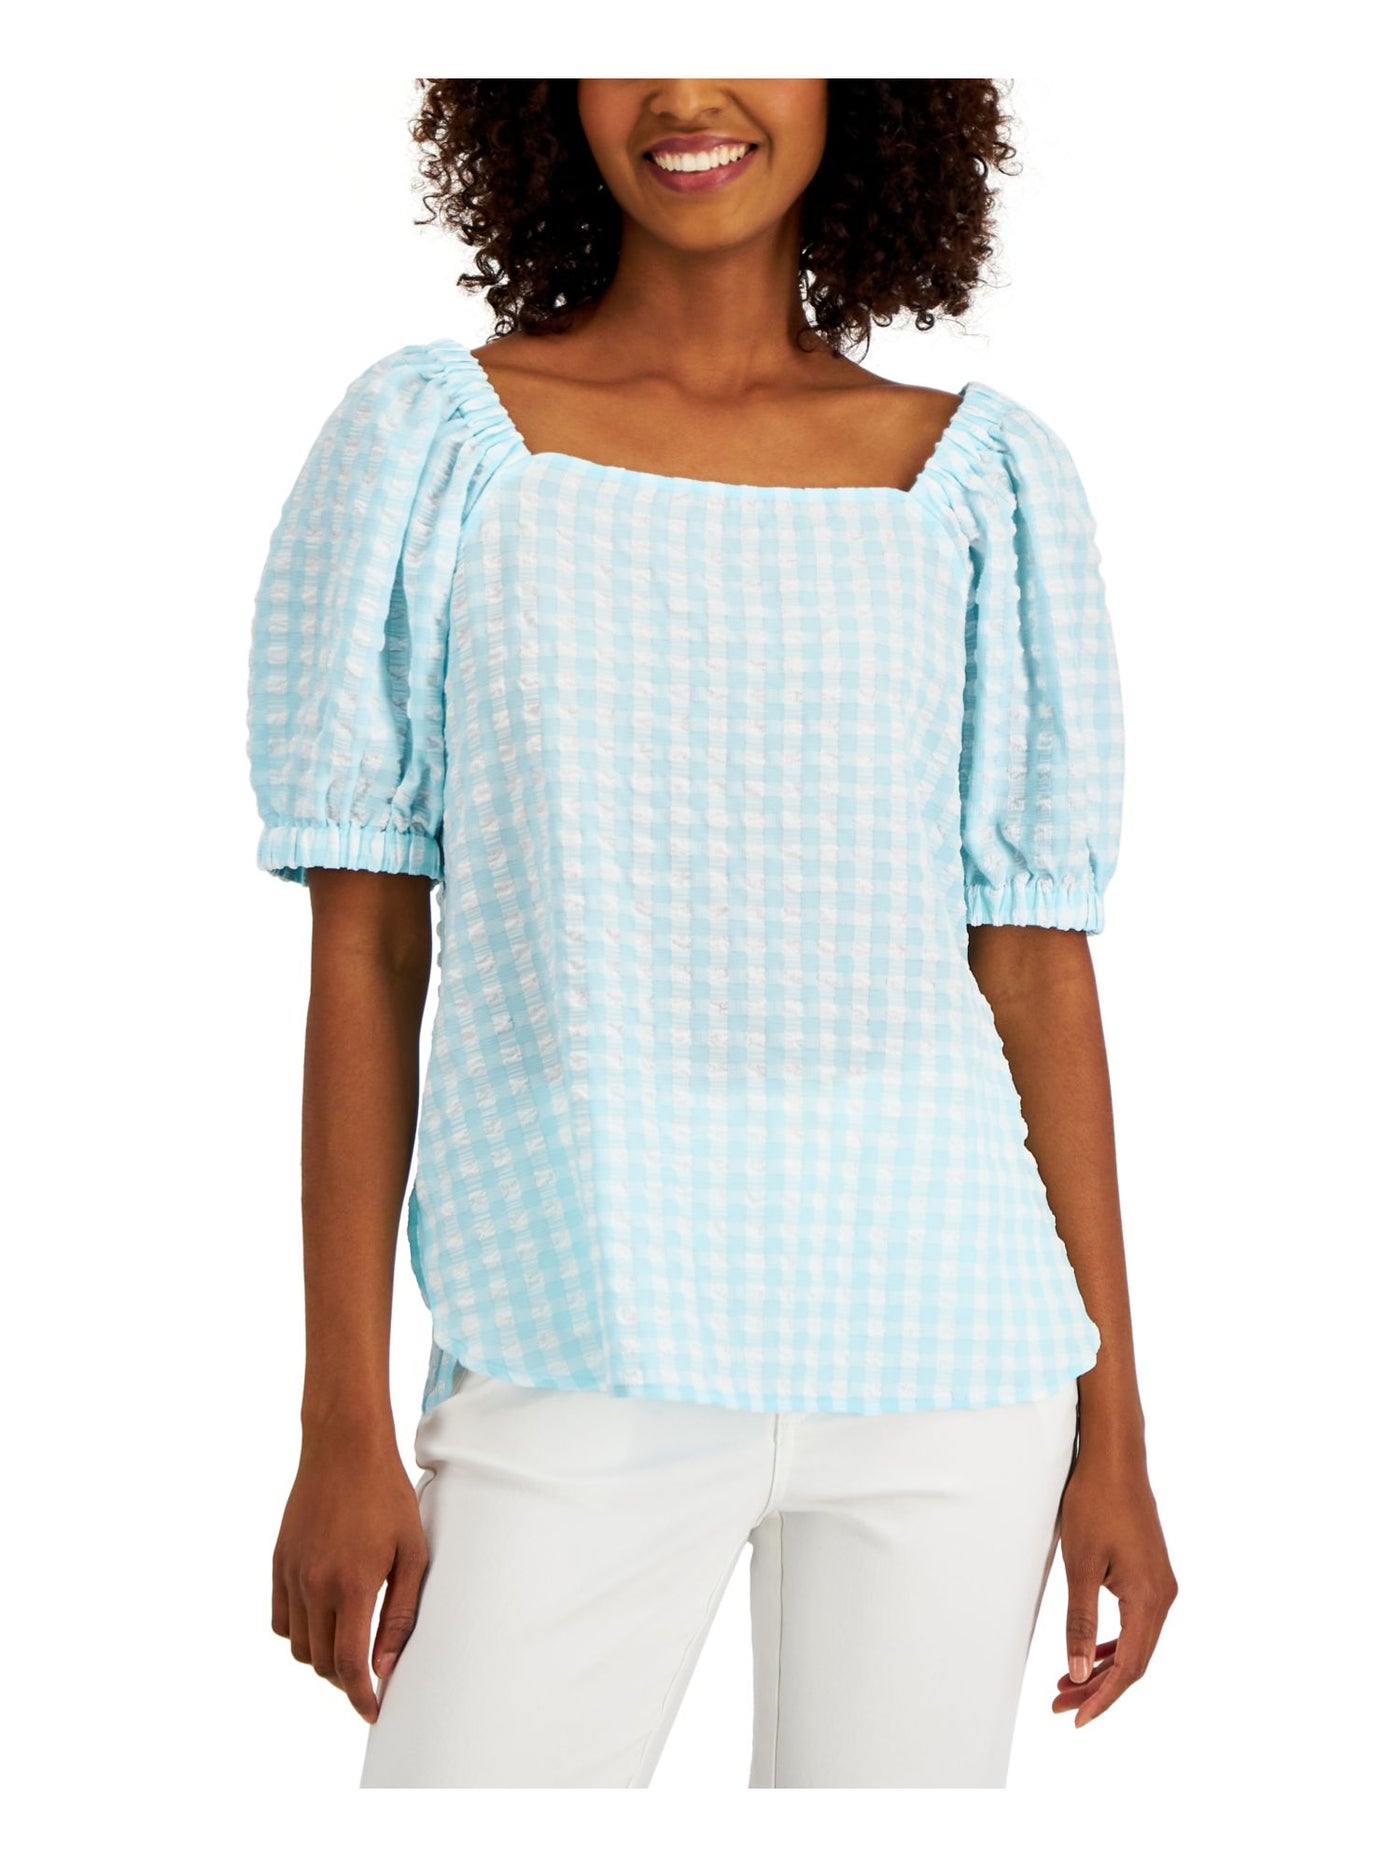 ANNE KLEIN Womens Light Blue Check Pouf Sleeve Square Neck Peasant Top S